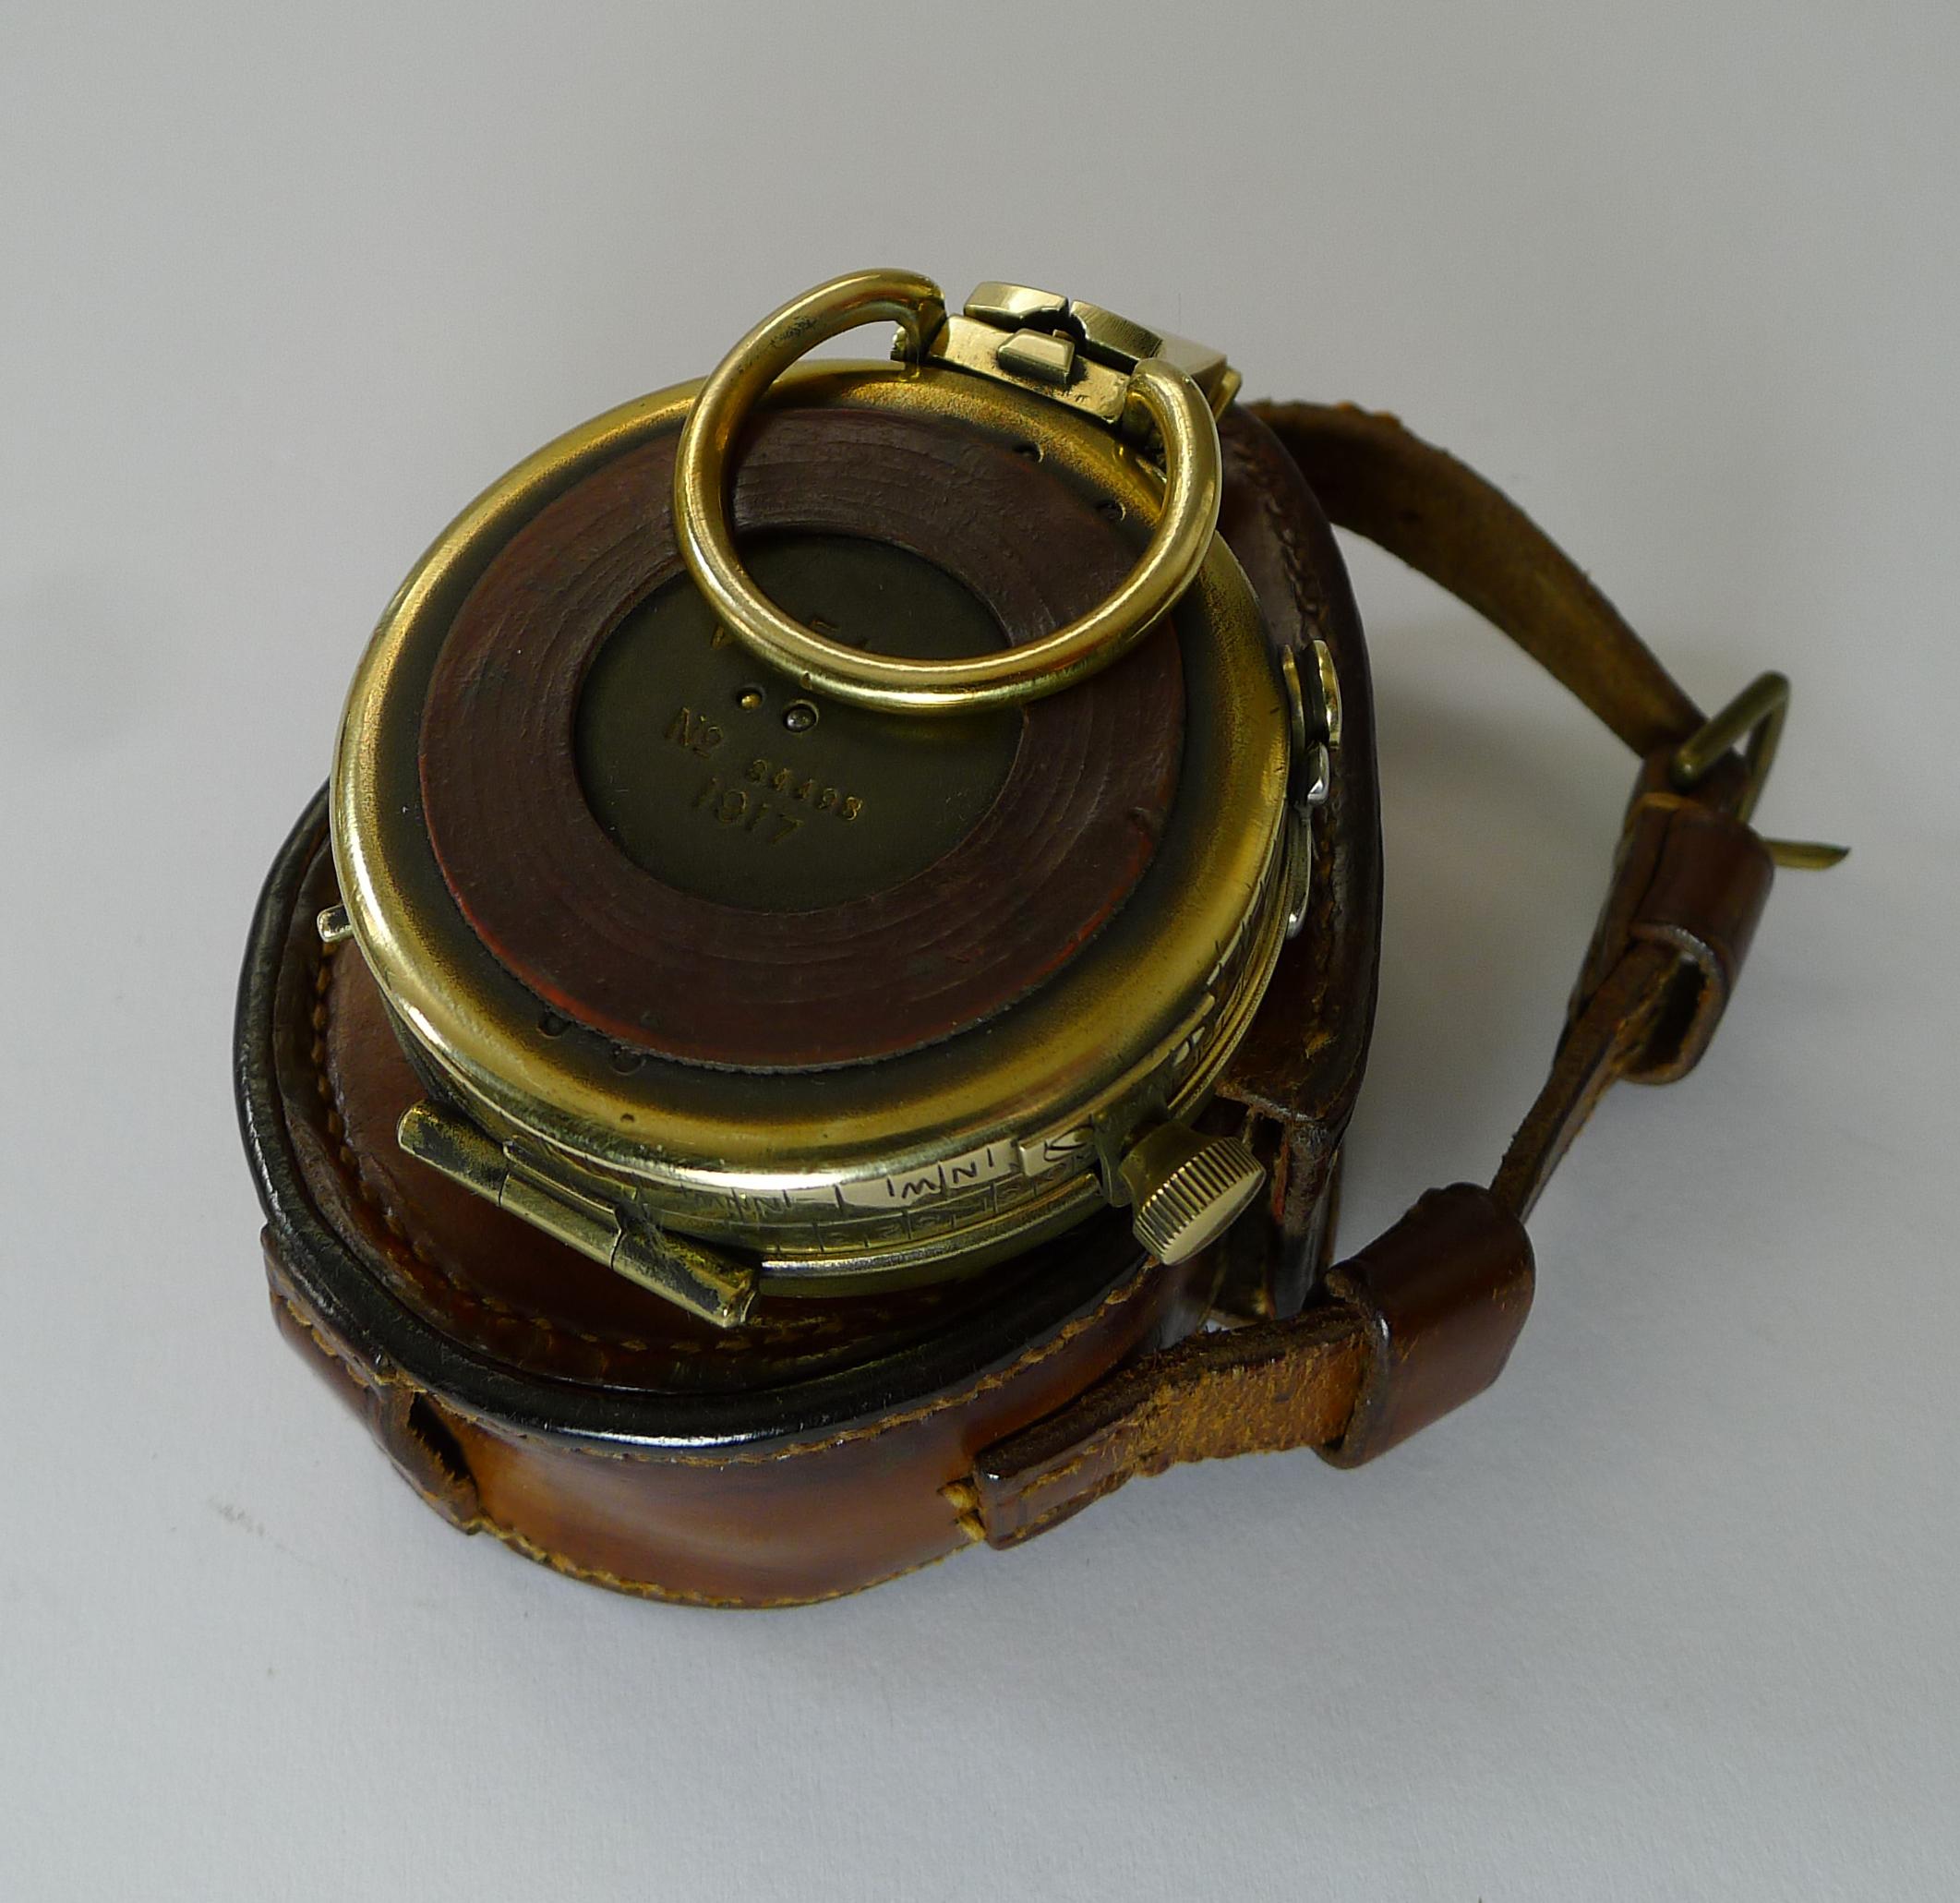 WWI 1917 British Army Officer's Compass, Verner's Patent Mk viii by French Ltd 6